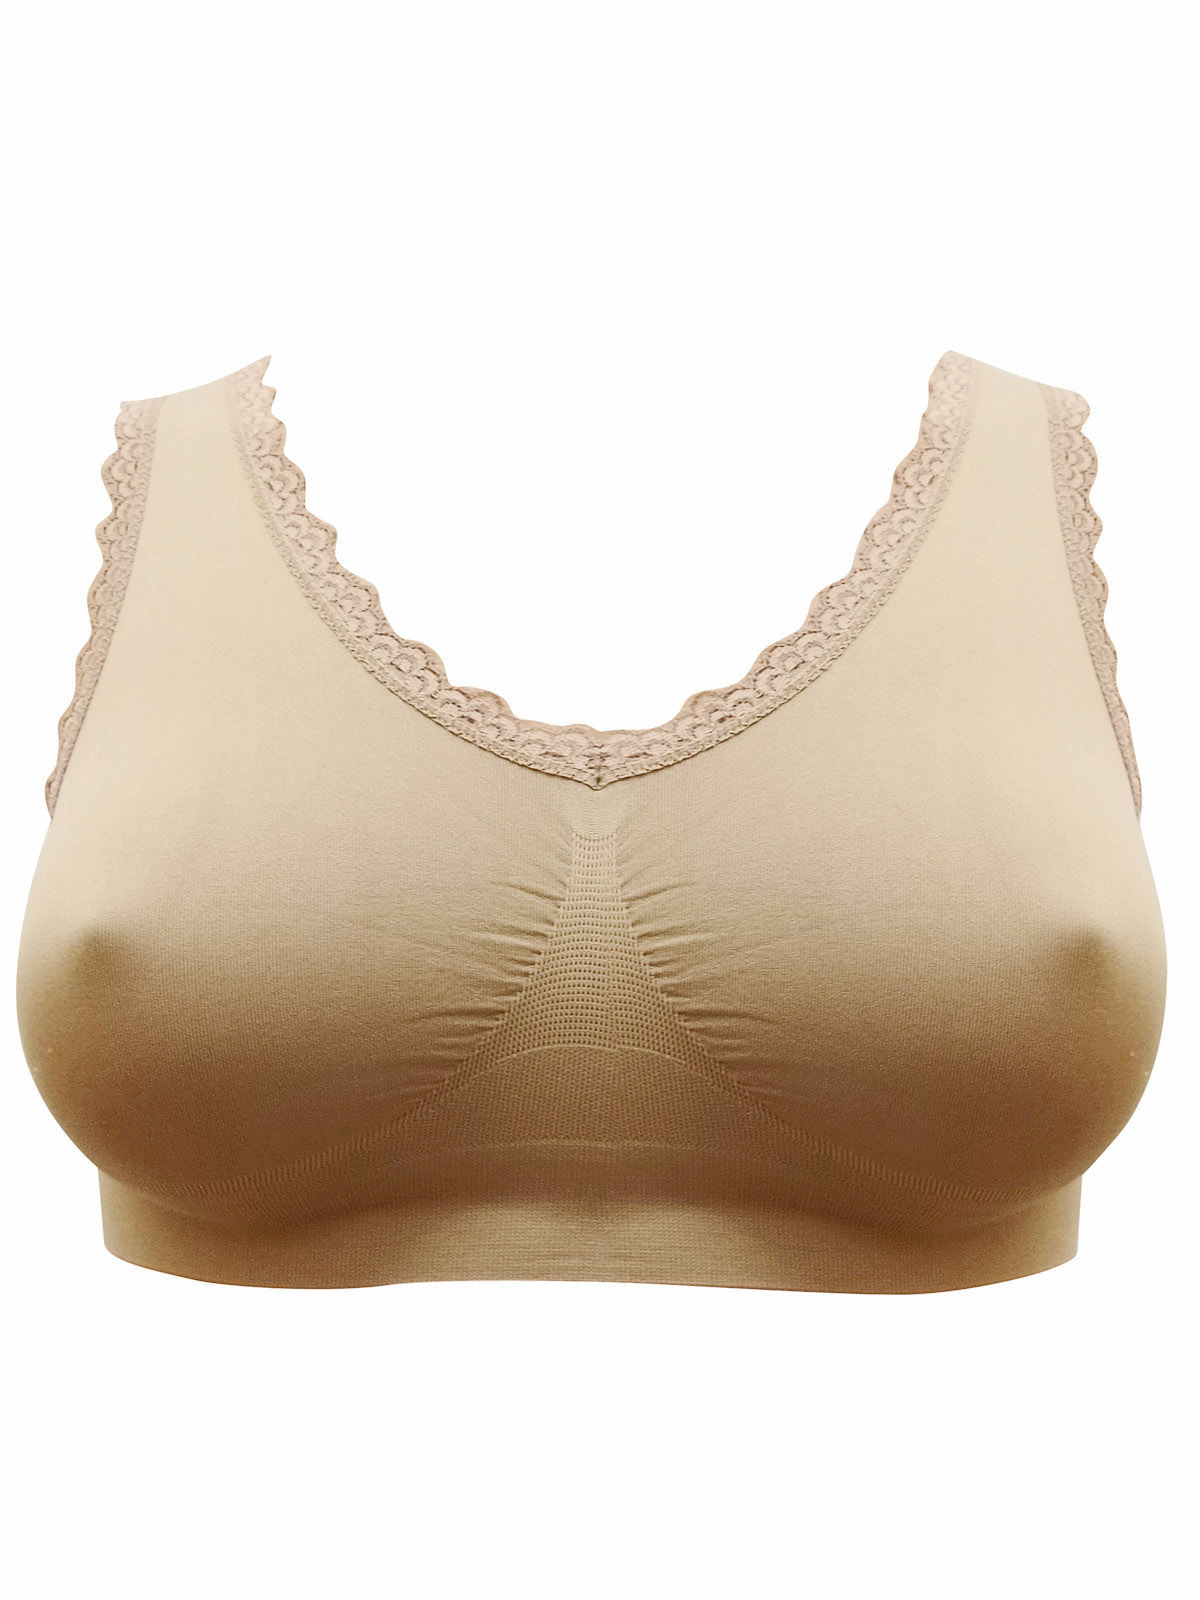 Wholesale Plus Size Comfort Bras by BRA' - - BRA' White/Natural 3-Pack ...